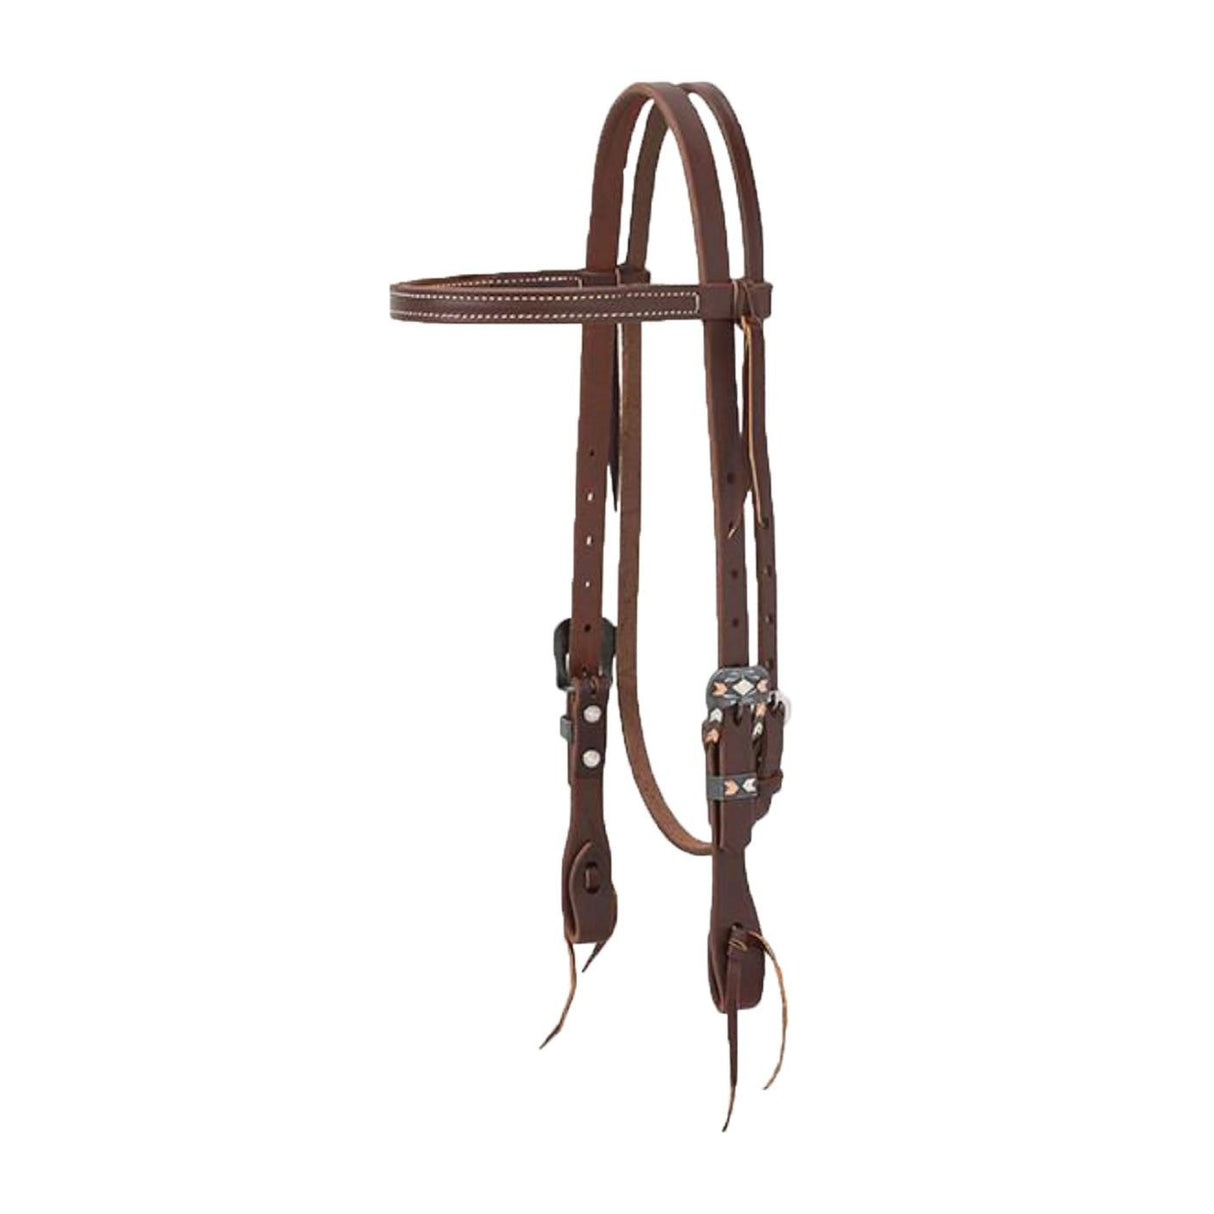 Weaver Canyon Rose Straight Browband Headstall Chevron Buckle